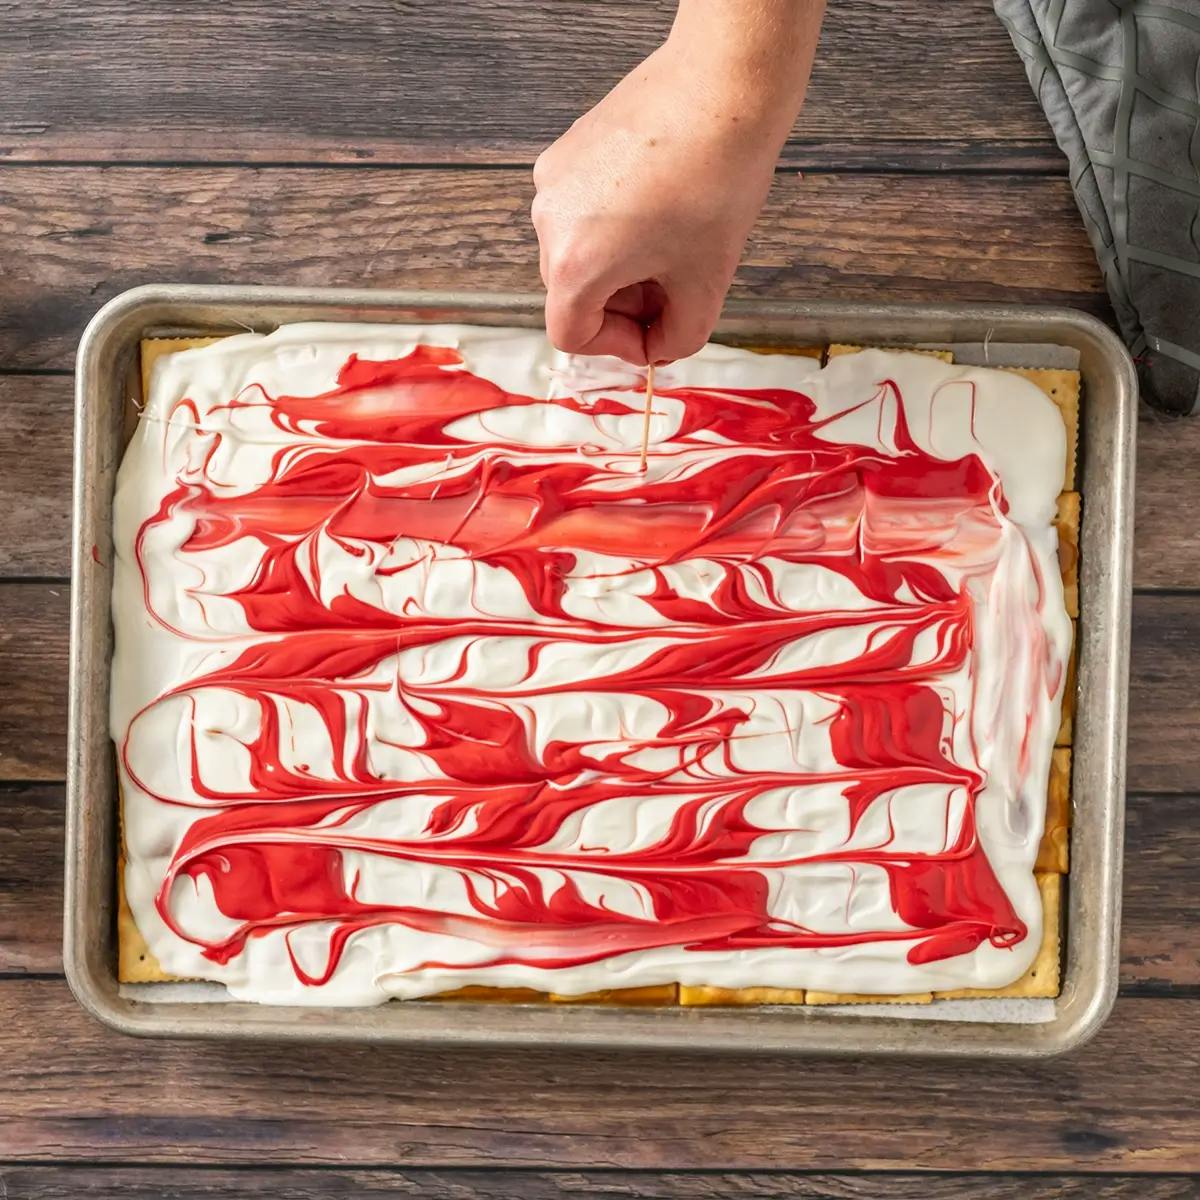 Swirling white chocolate and red candy together on the top of Christmas Crack.